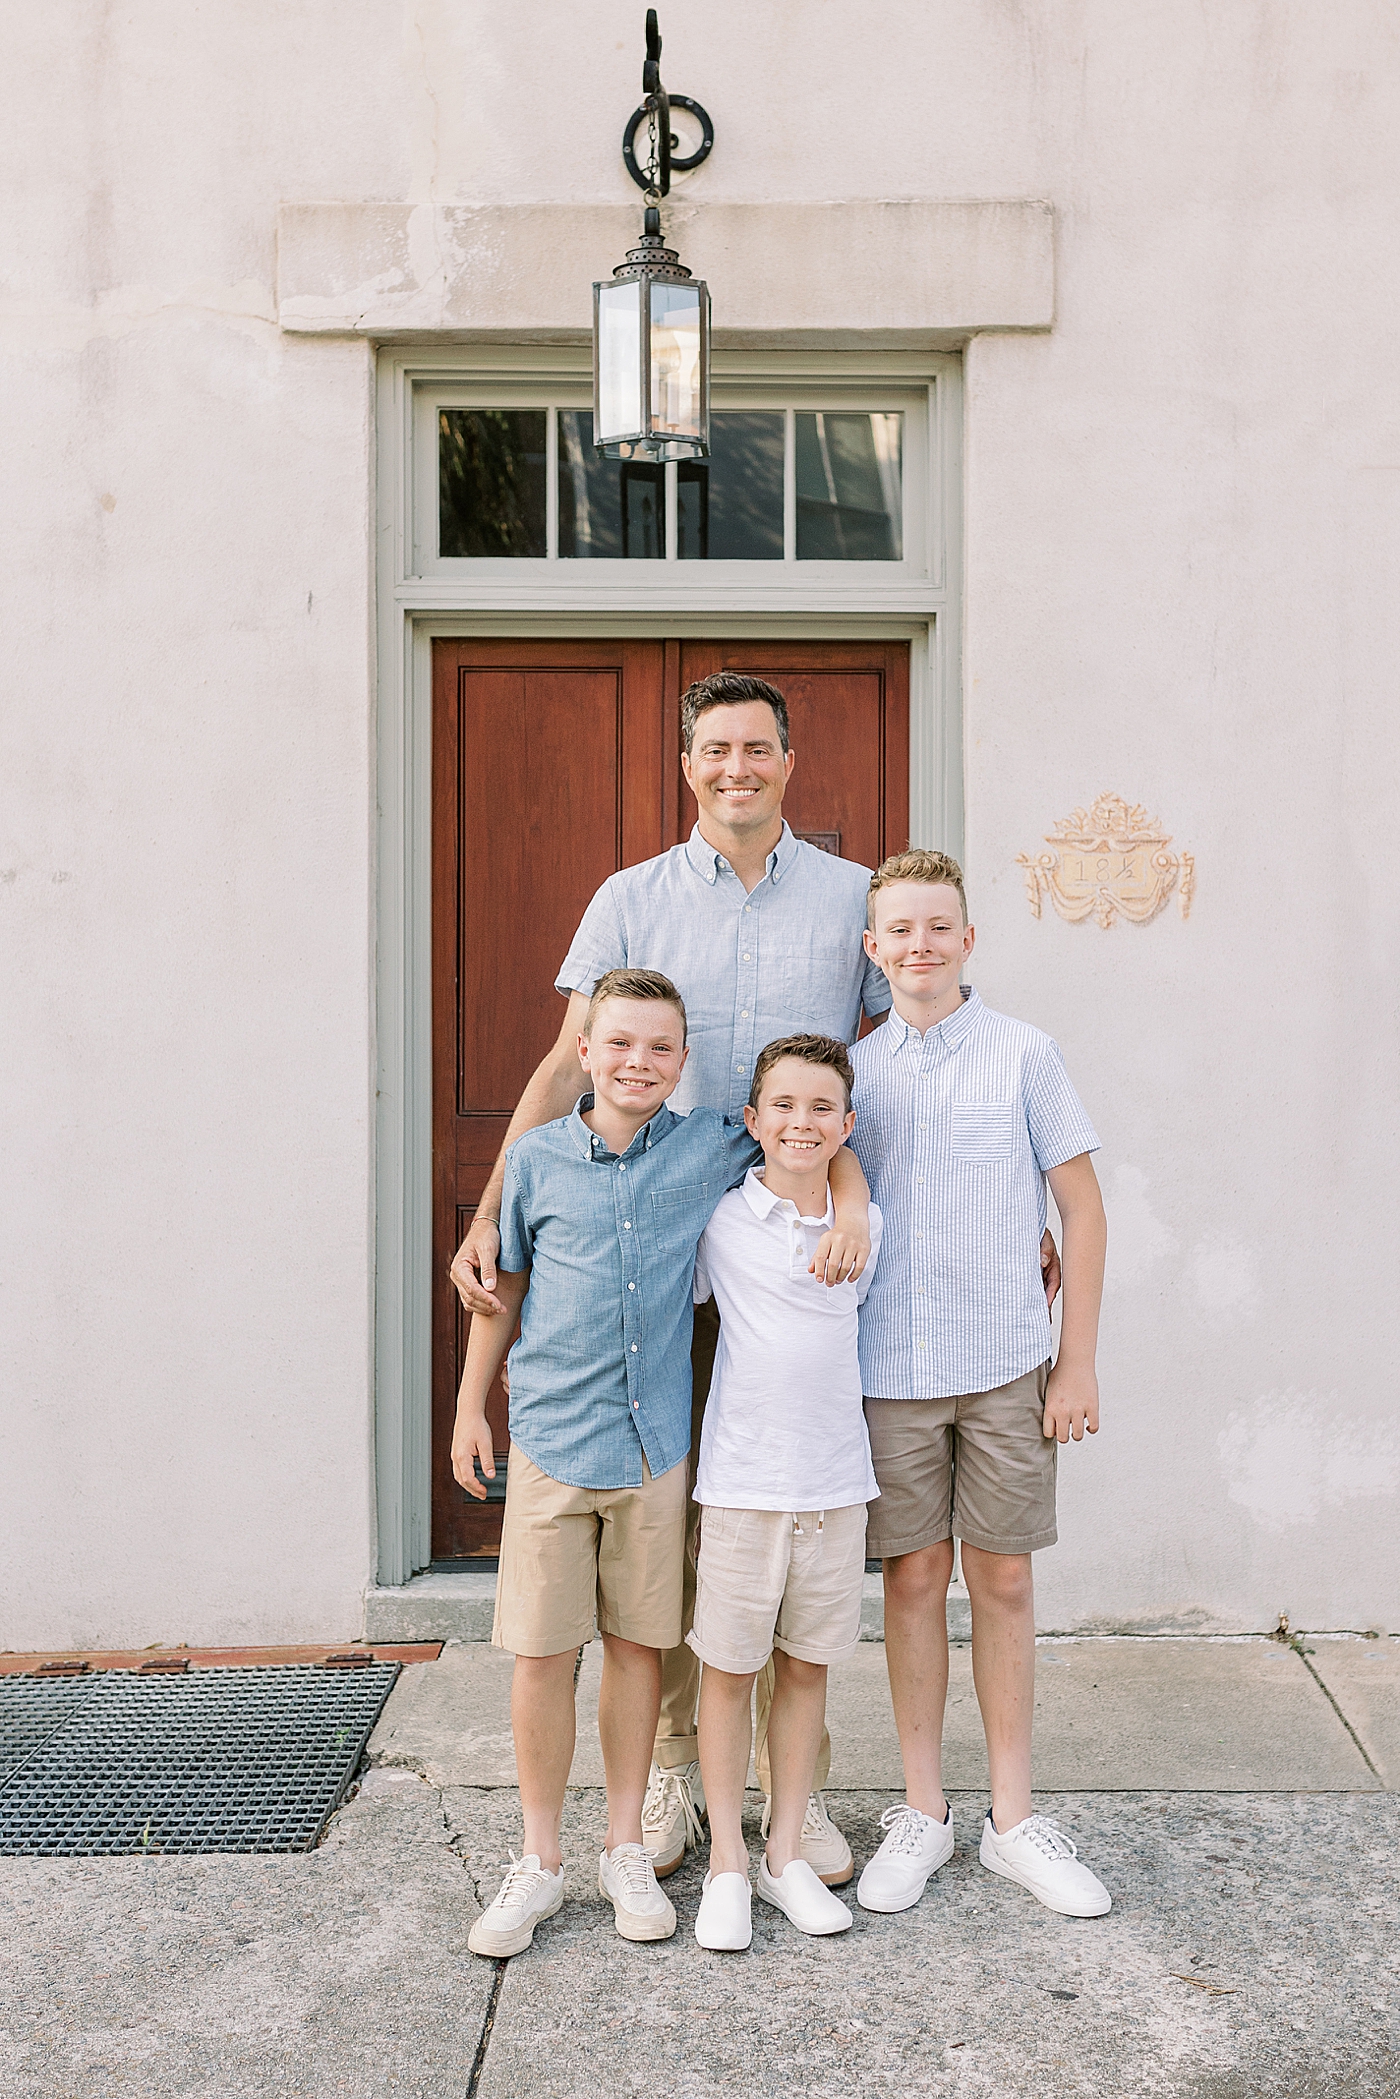 Dad smiling with his three sons | Photo by Caitlyn Motycka Photography